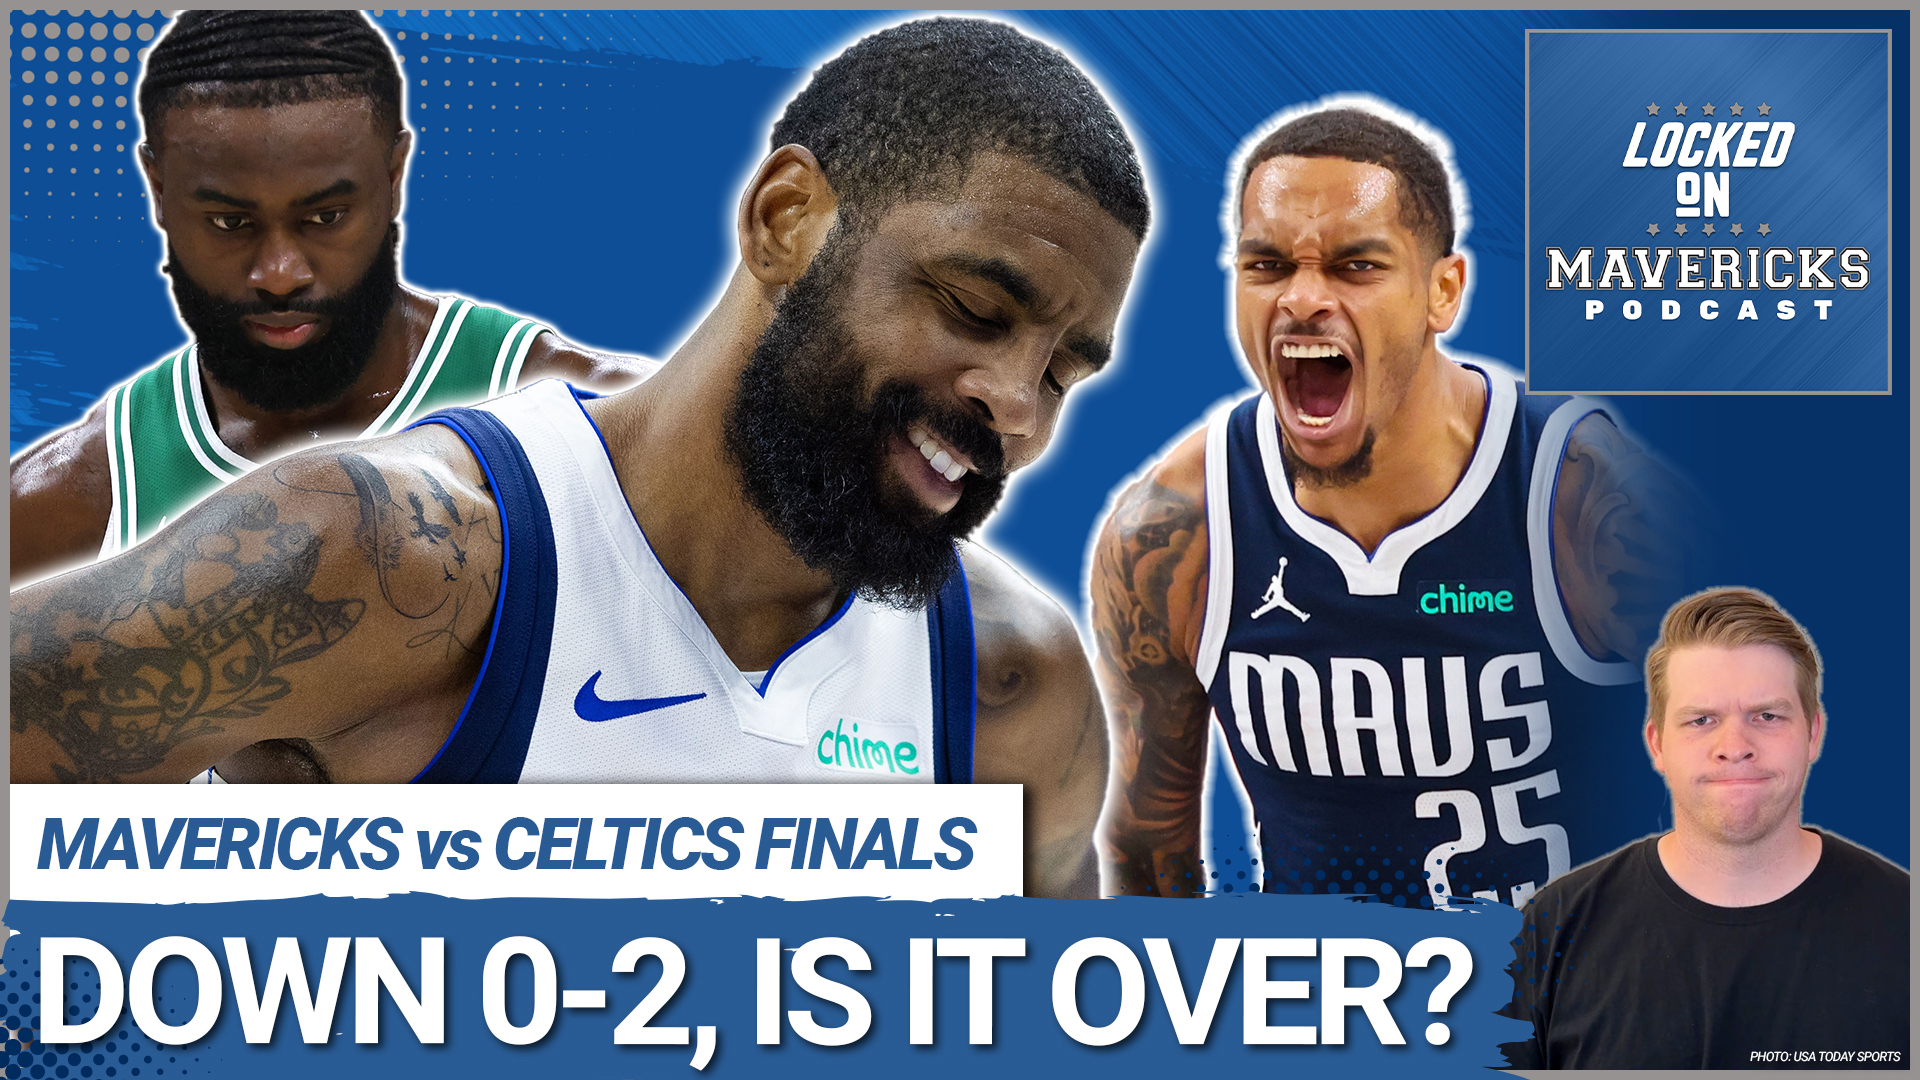 Nick Angstadt explains why hope for the Dallas Mavericks in the NBA Finals rests with Kyrie Irving, how Luka Doncic's turnovers affected the game, and more.